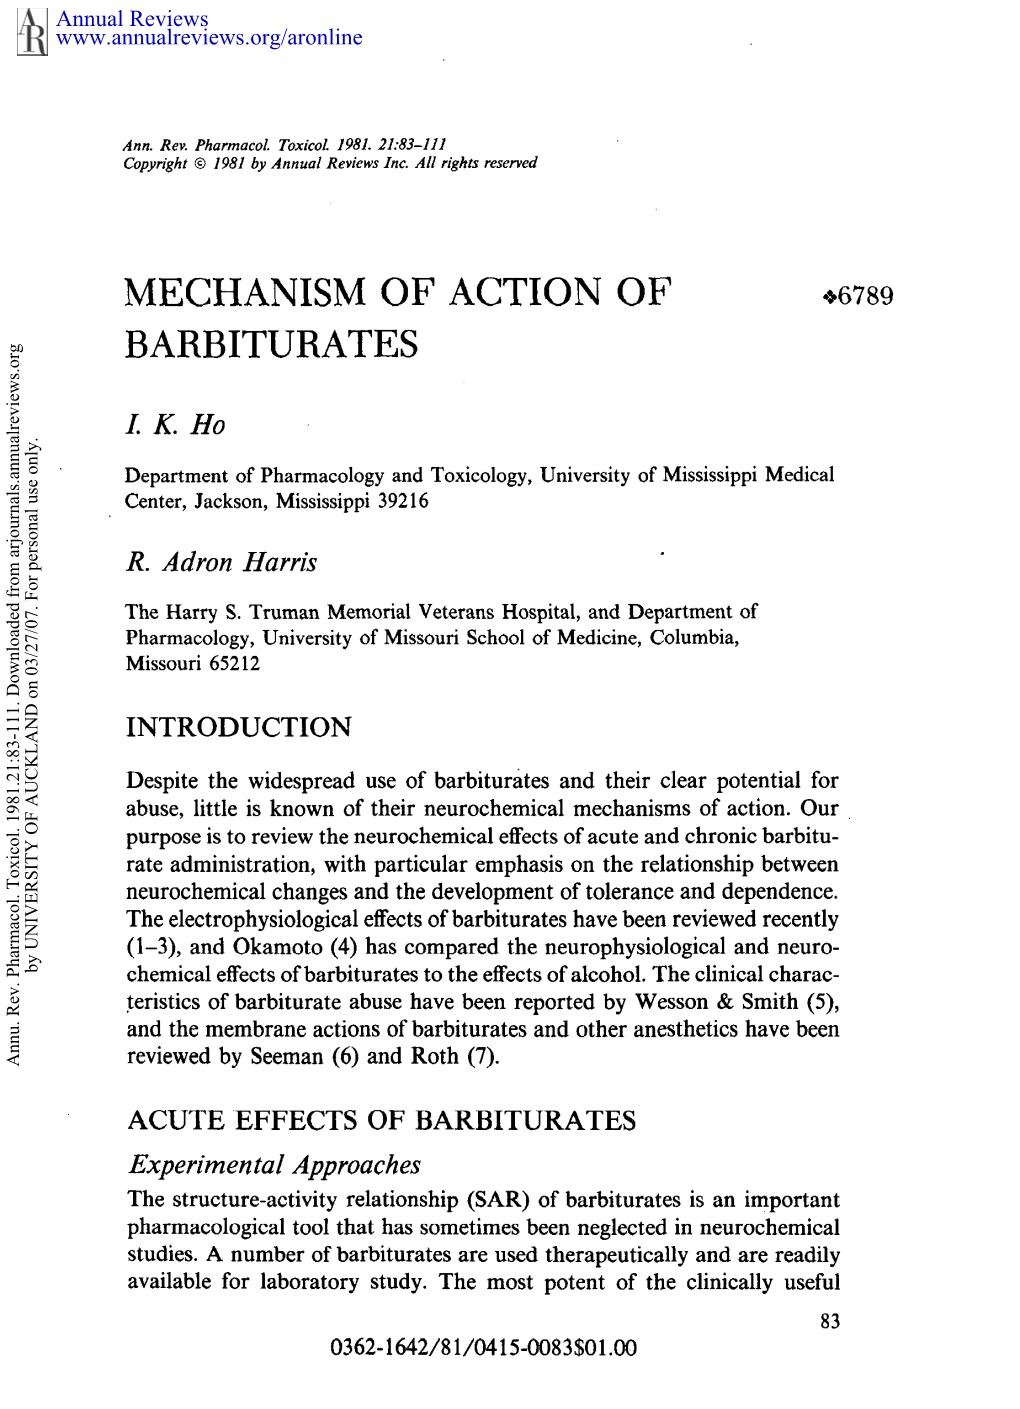 Mechanism of Action of Barbiturates 93